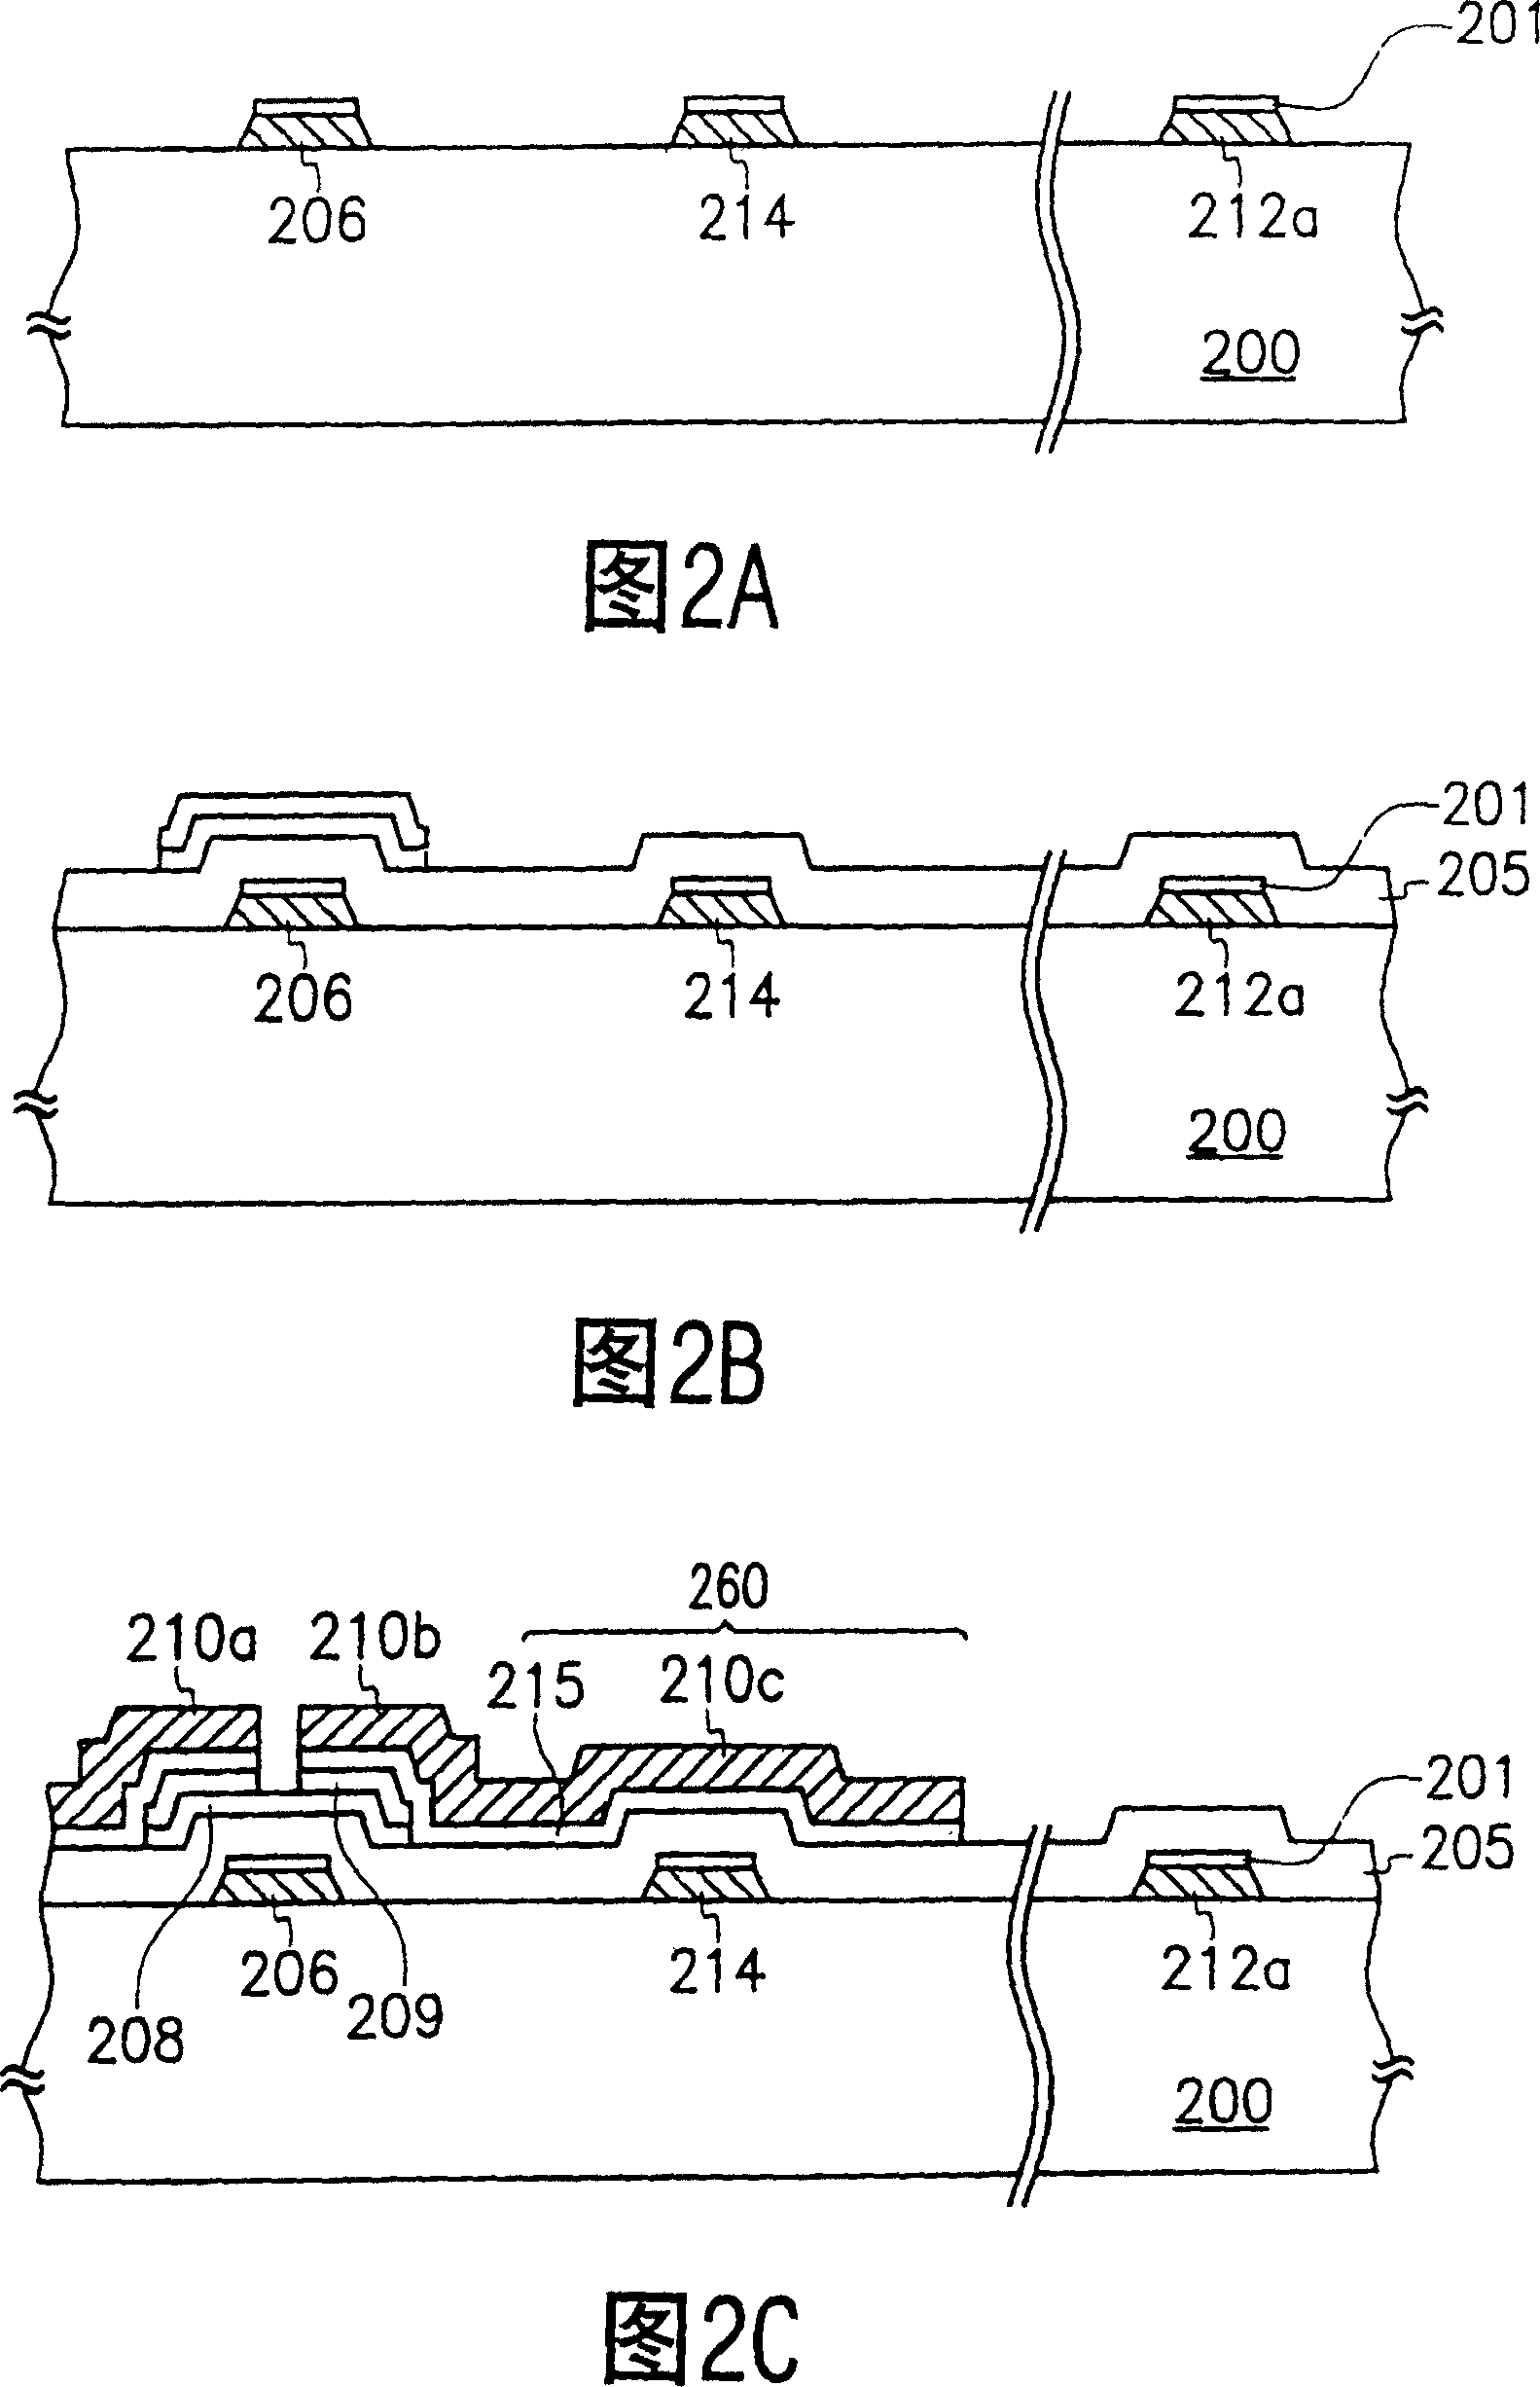 Producing method for thin-film transistor array baseplate